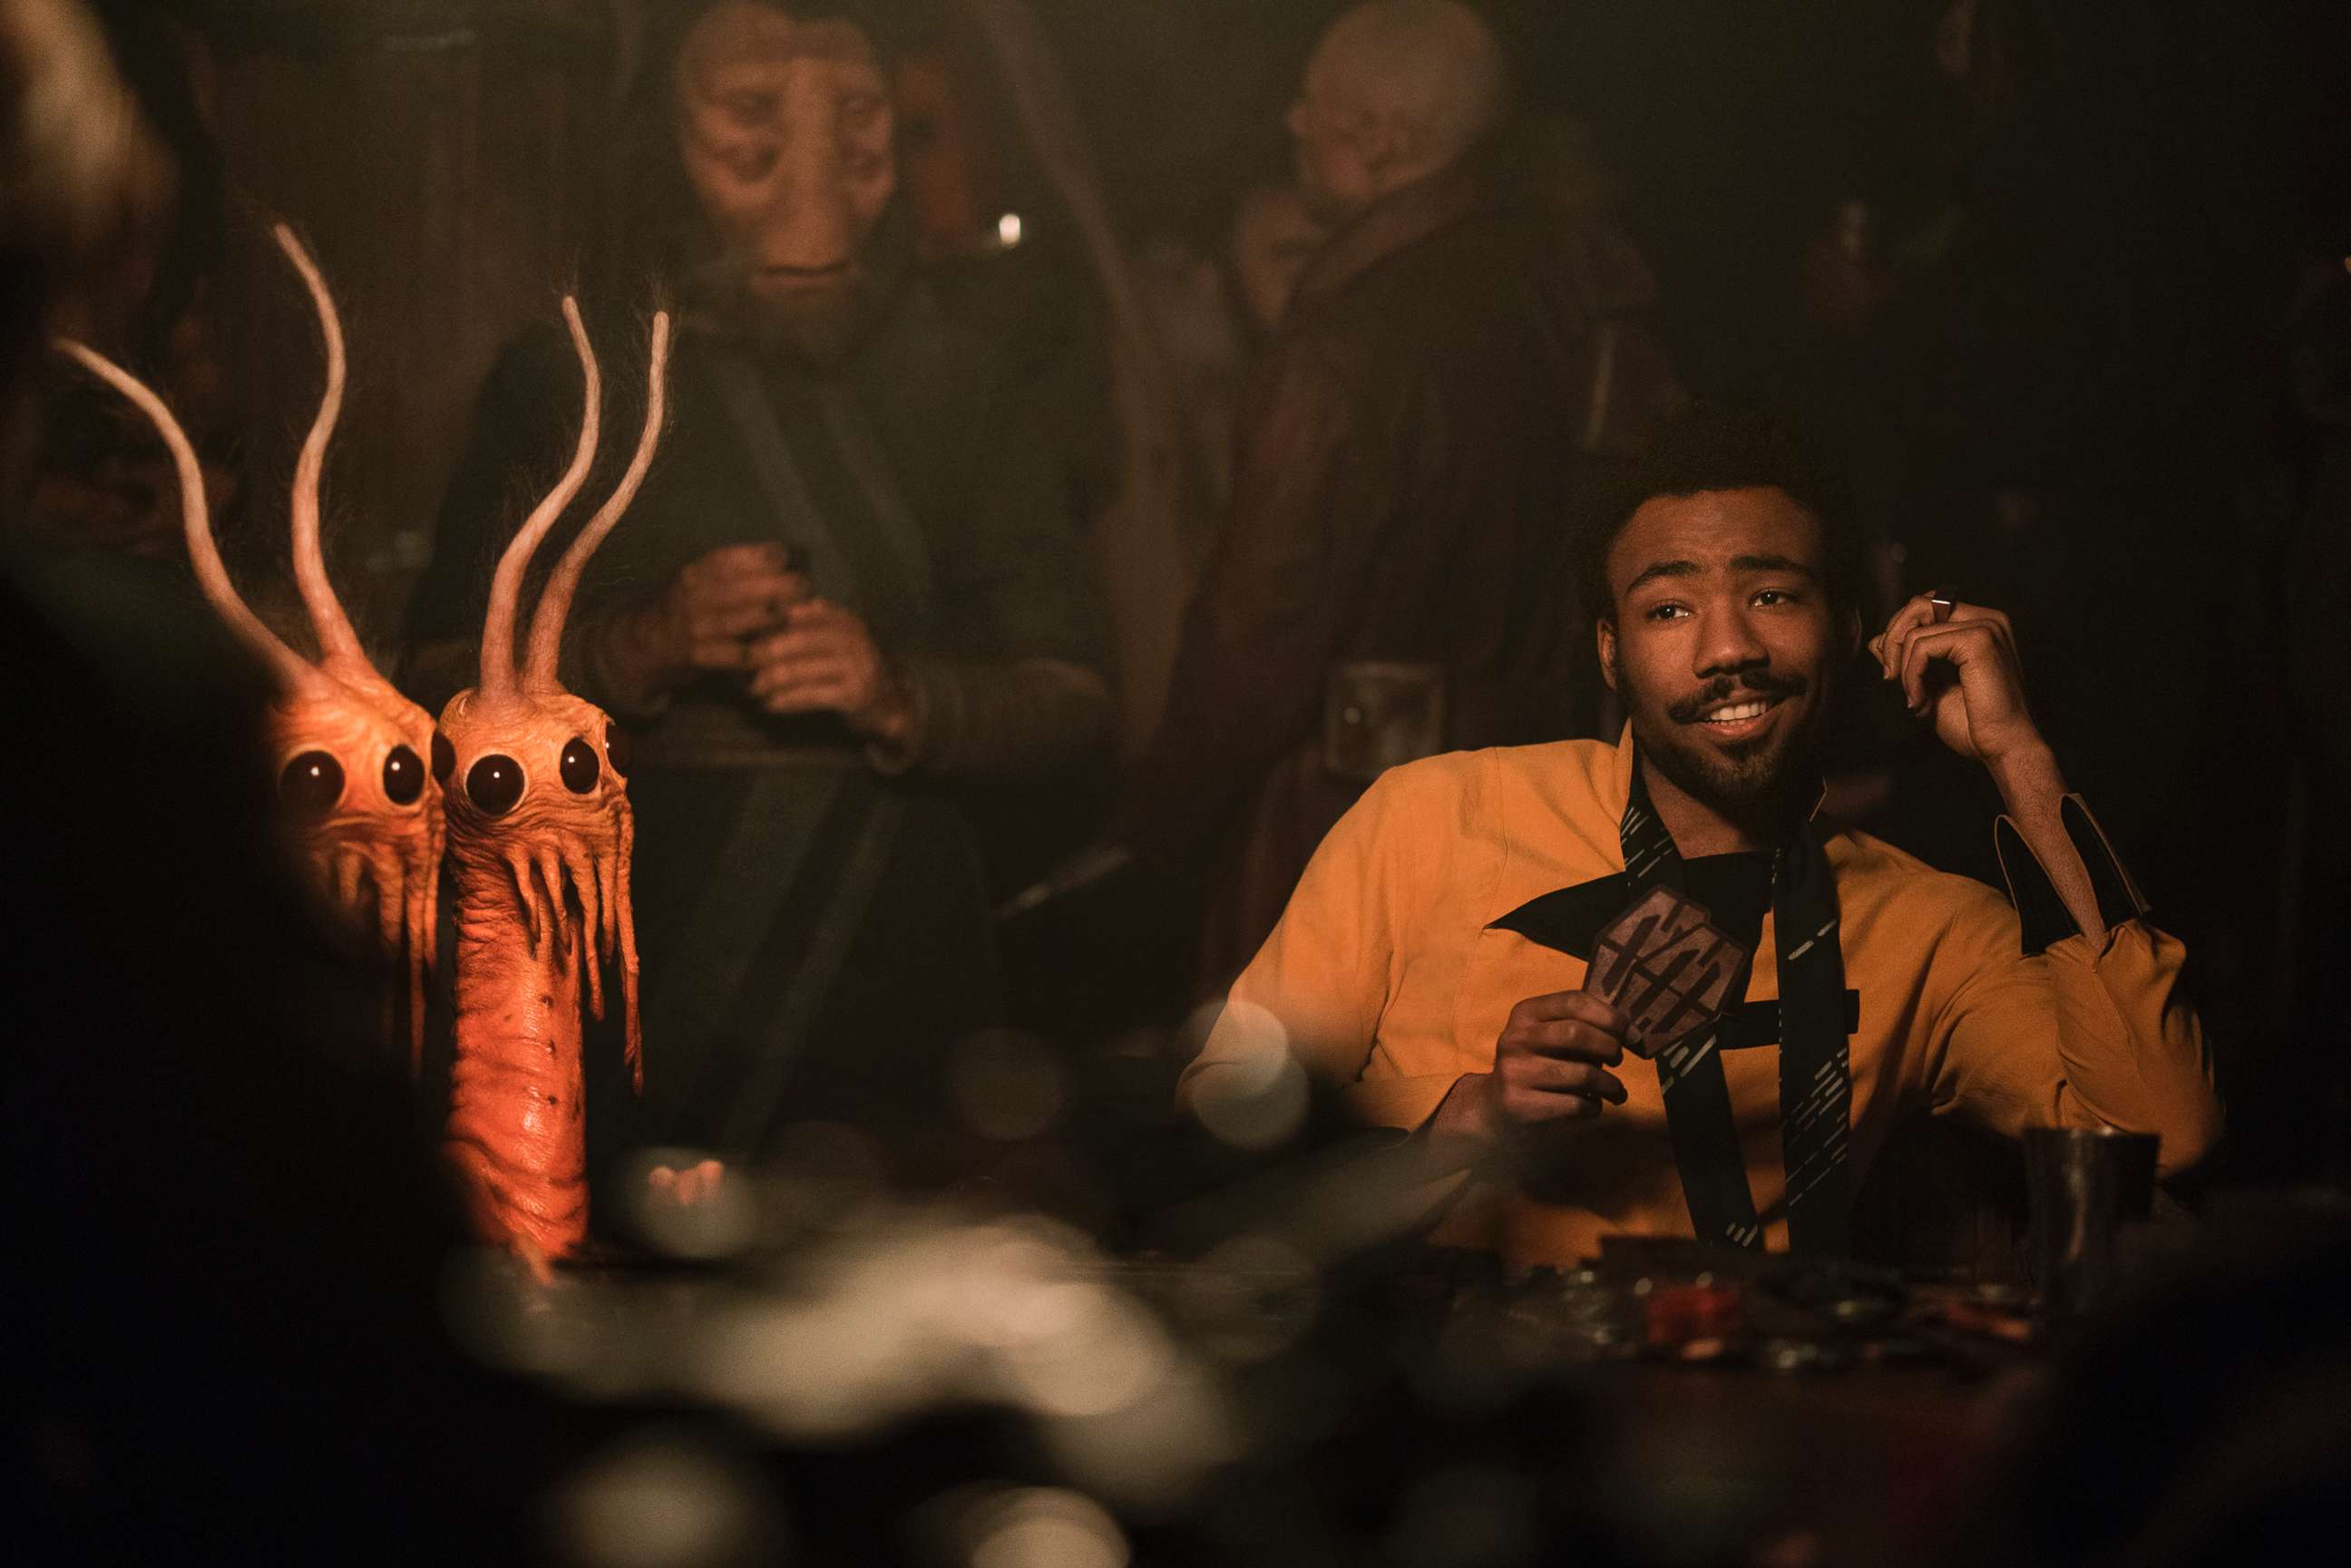 PHOTO: This image released by Lucasfilm shows Donald Glover as Lando Calrissian in a scene from "Solo: A Star Wars Story."